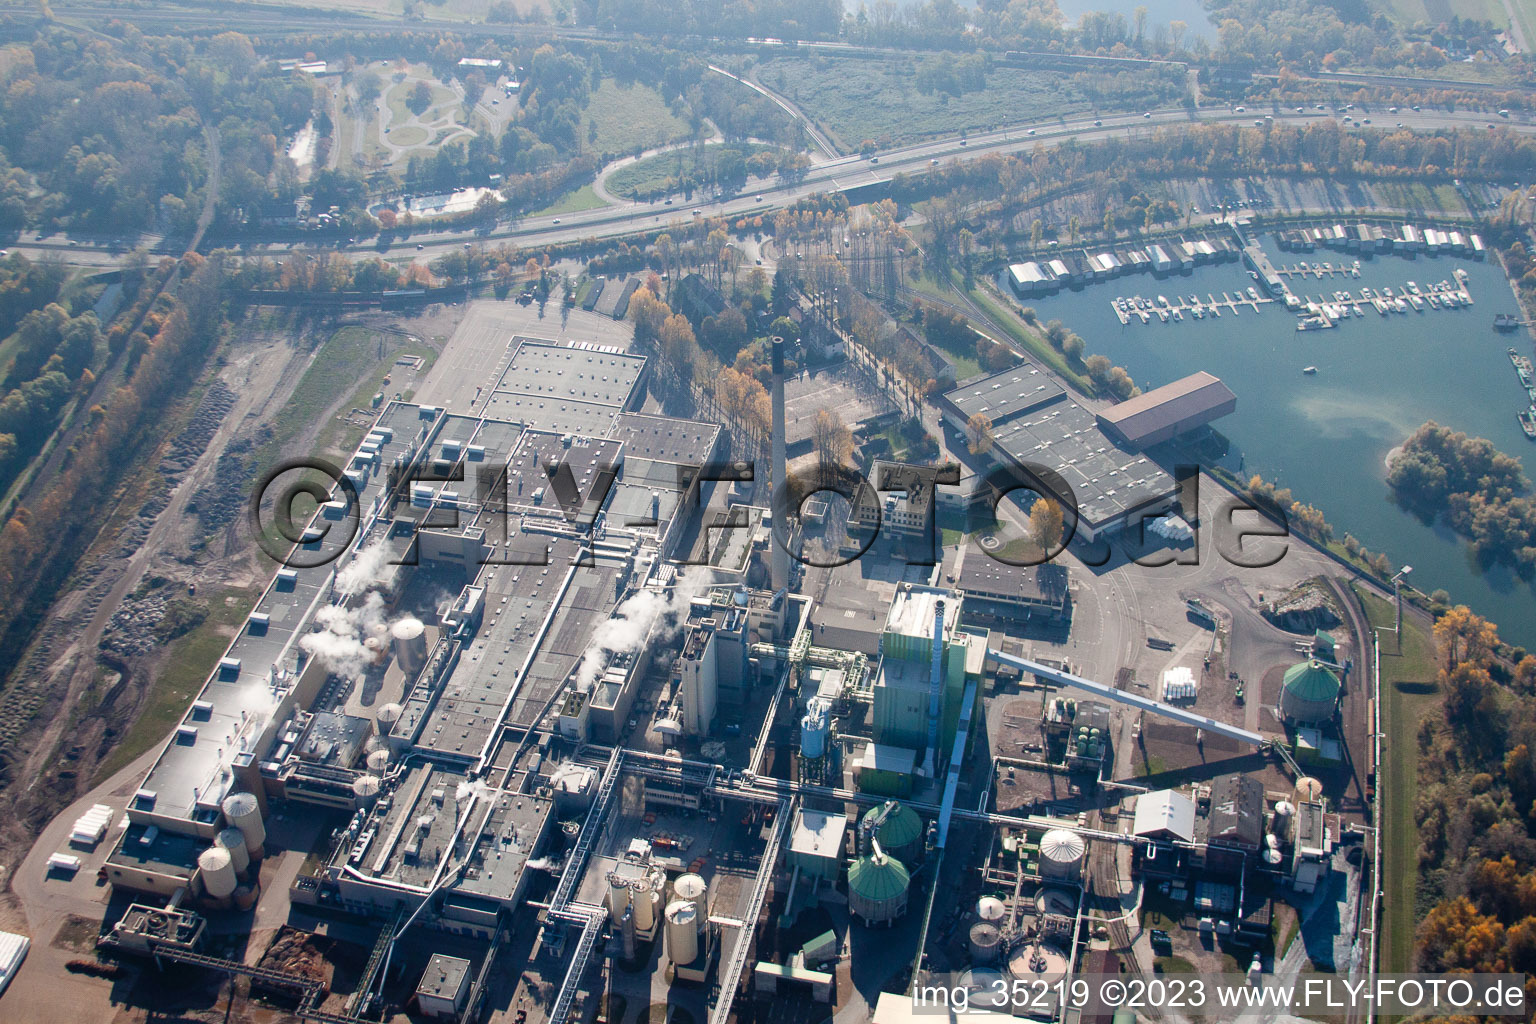 Aerial photograpy of Stora Enso in the district Rheinhafen in Karlsruhe in the state Baden-Wuerttemberg, Germany